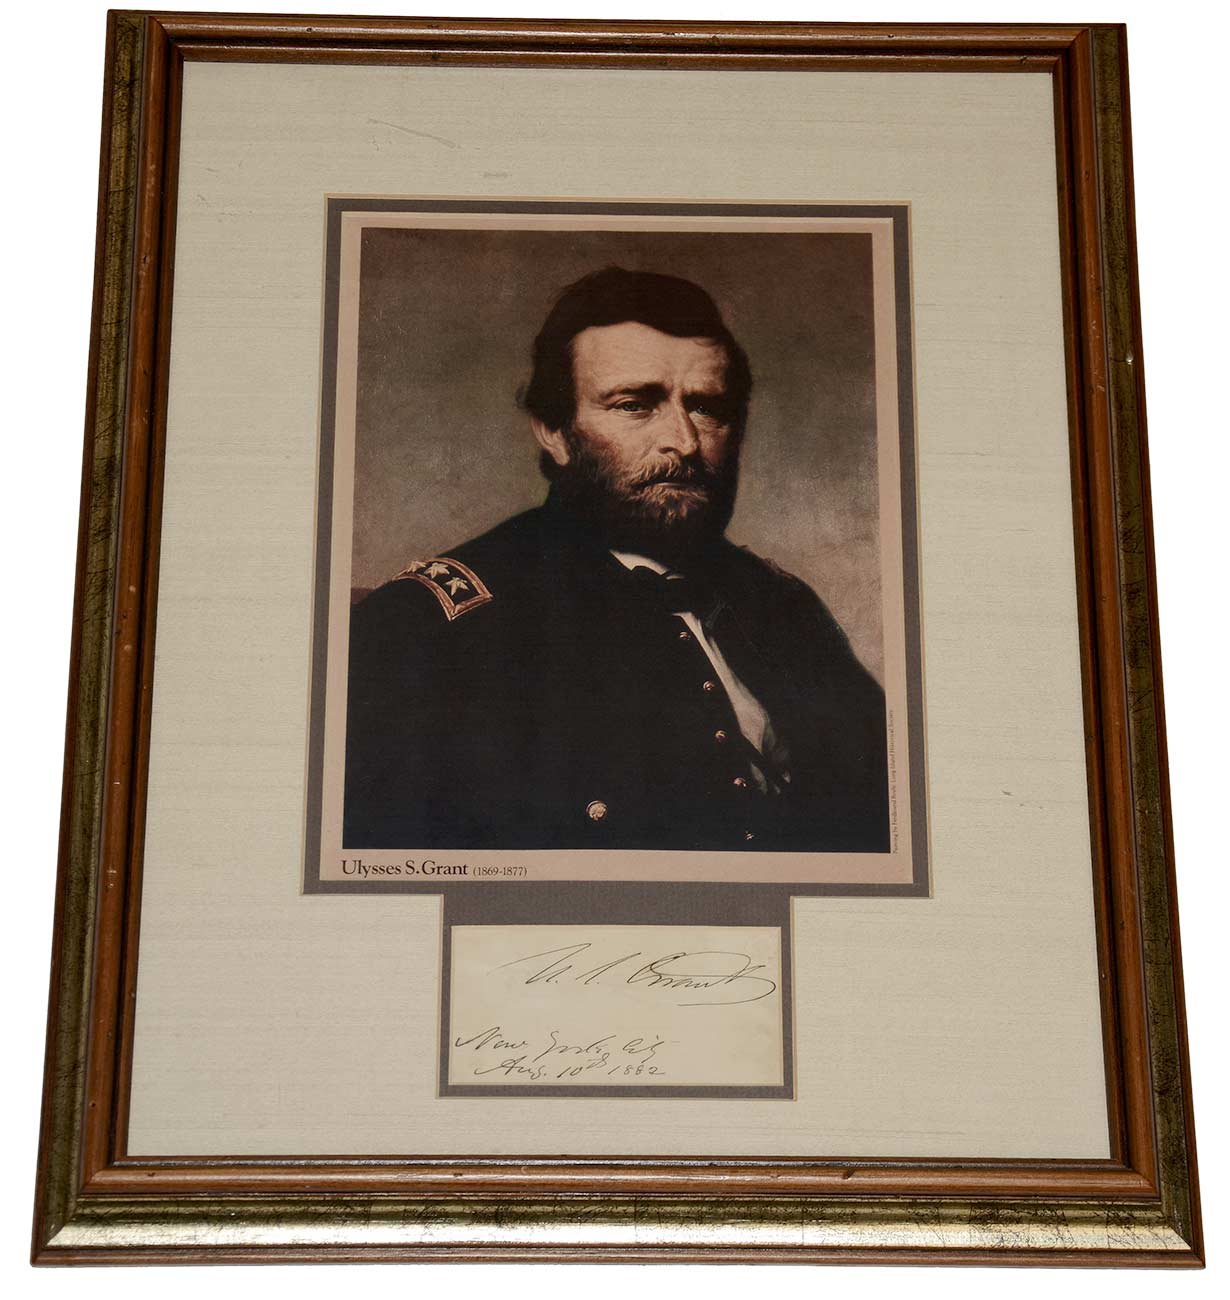 FRAMED POST-WAR U.S. GRANT CLIPPED SIGNATURE WITH LITHOGRAPH OF COLOR PORTRAIT